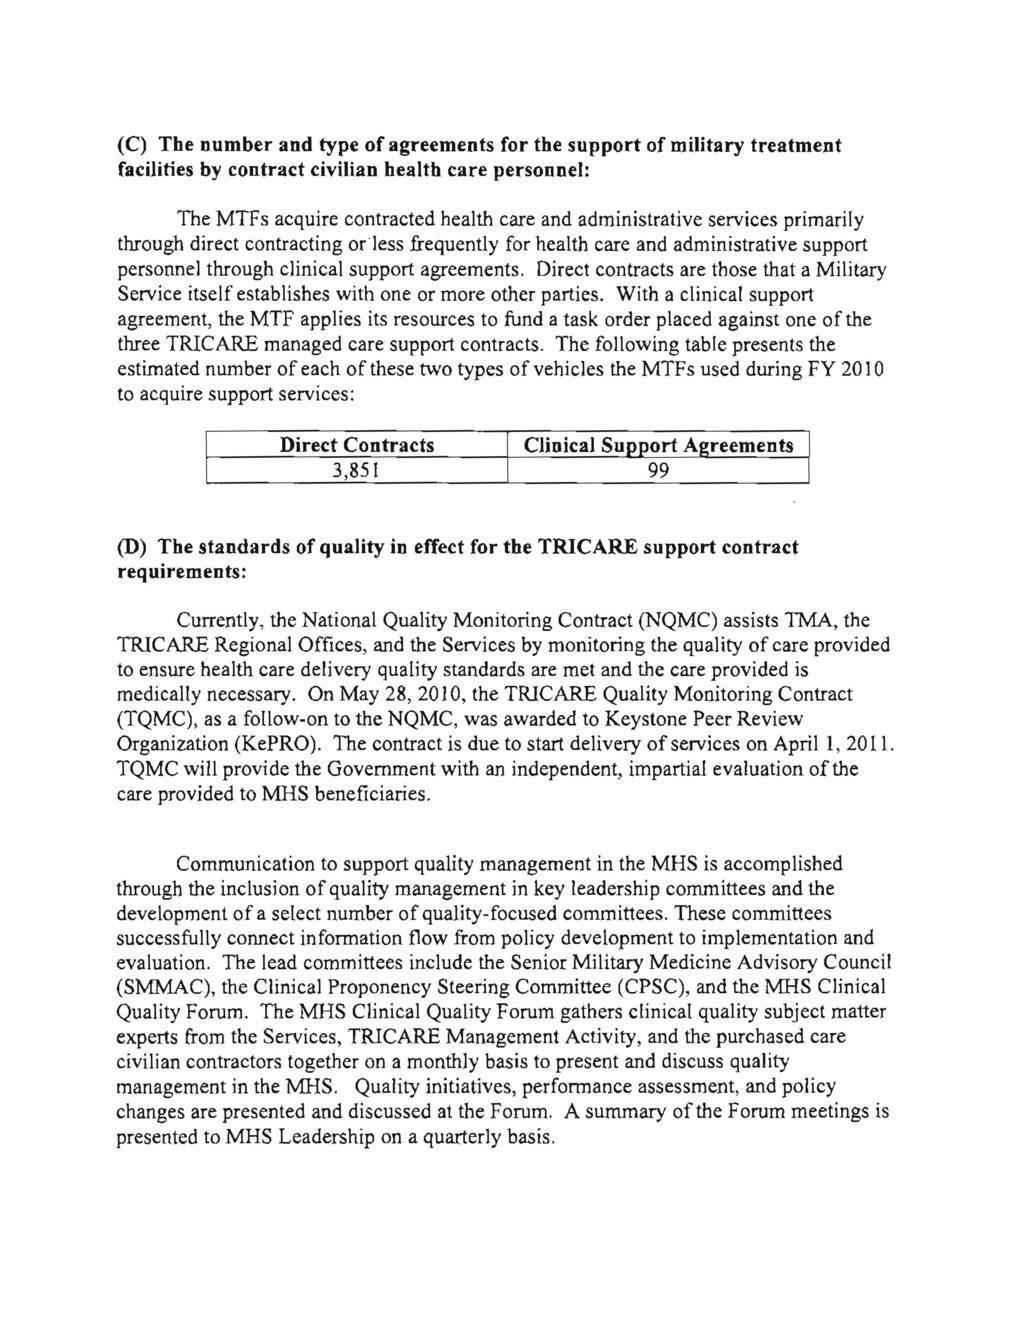 (C) The number and type of agreements for the support of military treatment facilities by contract civilian health care personnel: The MTFs acquire contracted health care and administrative services